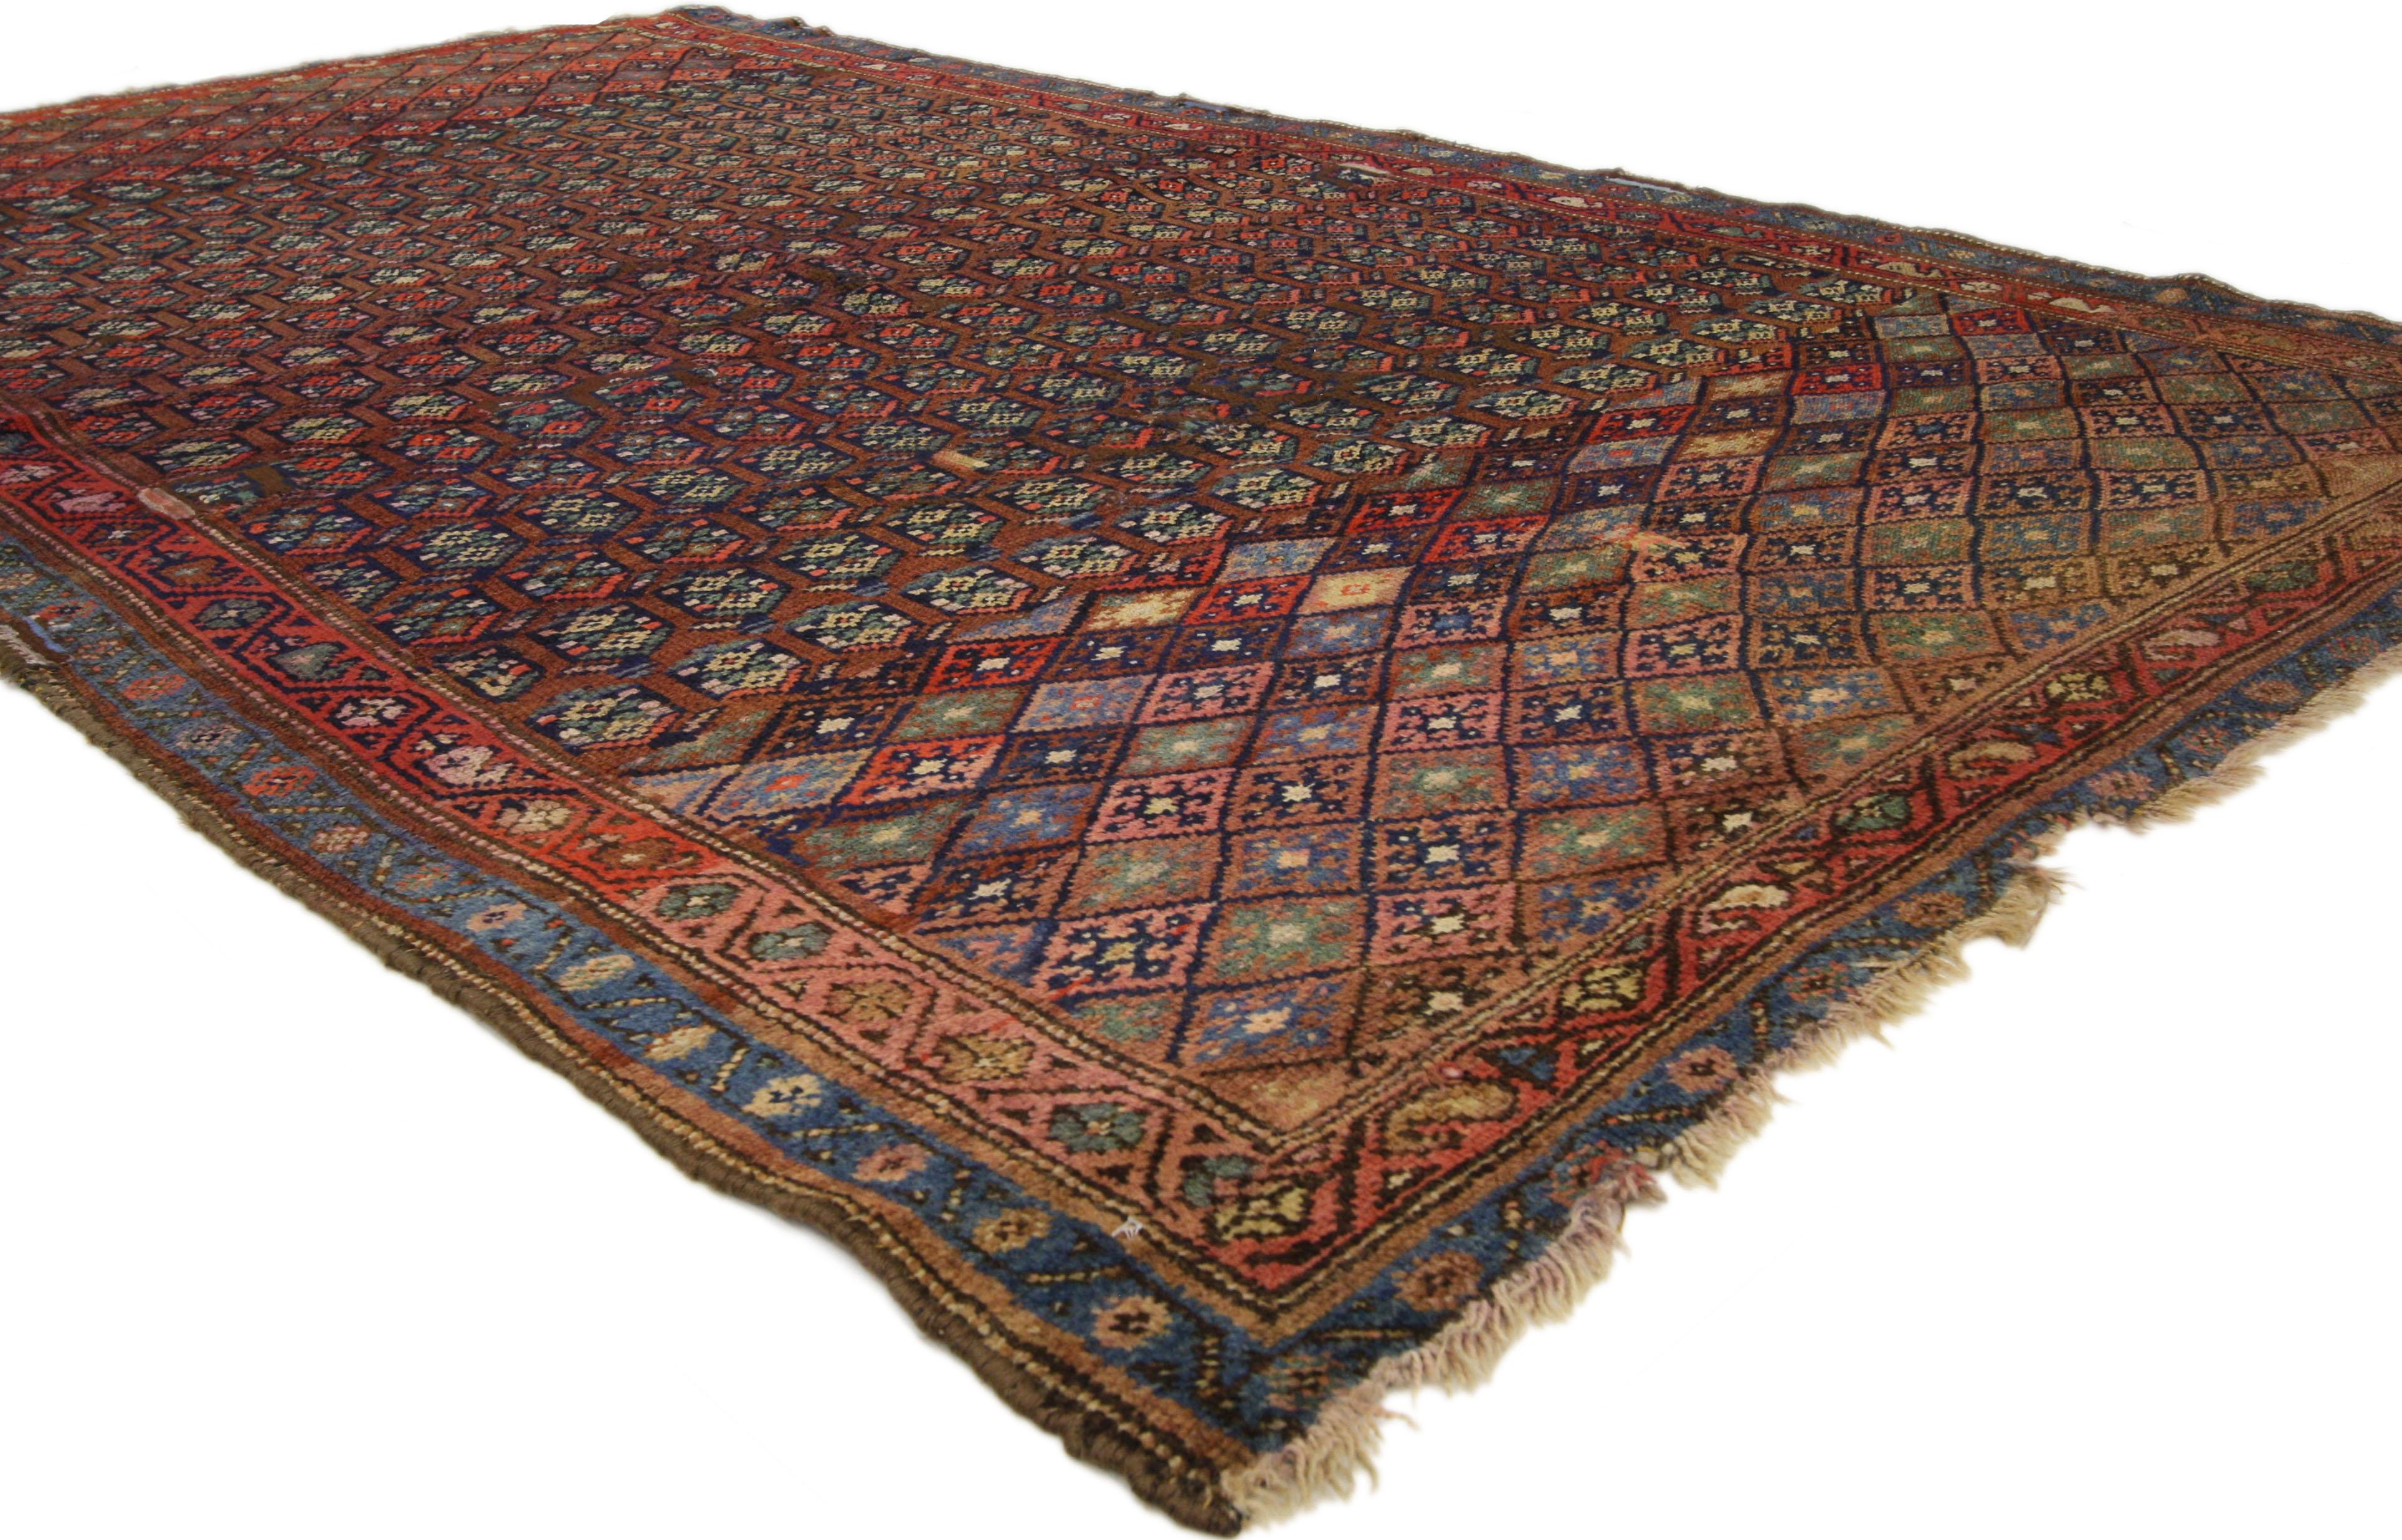 72611 distressed antique Persian Kurd rug with Adirondack Lodge style. This hand knotted wool distressed antique Persian Kurd rug features an all-over geometric pattern composed of lozenges and boteh motifs. It is enclosed with a double meander